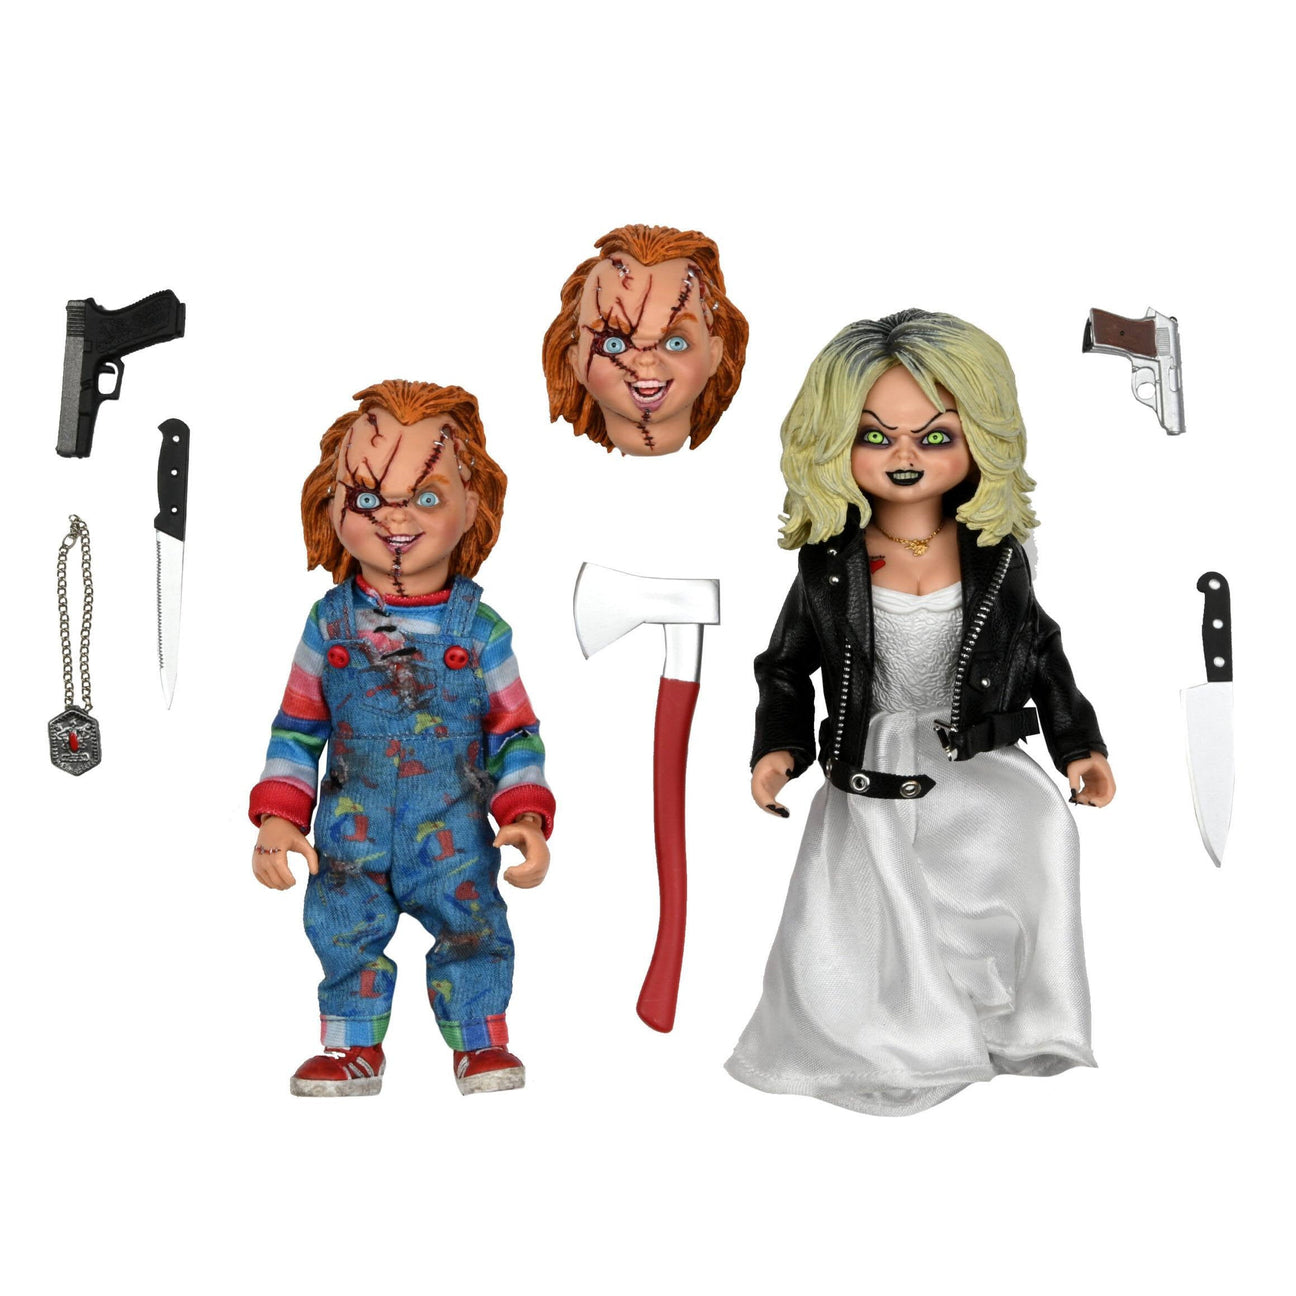 Bride of Chucky: Chucky and Tiffany - 8 inch Clothed-Actionfiguren-NECA-Mighty Underground